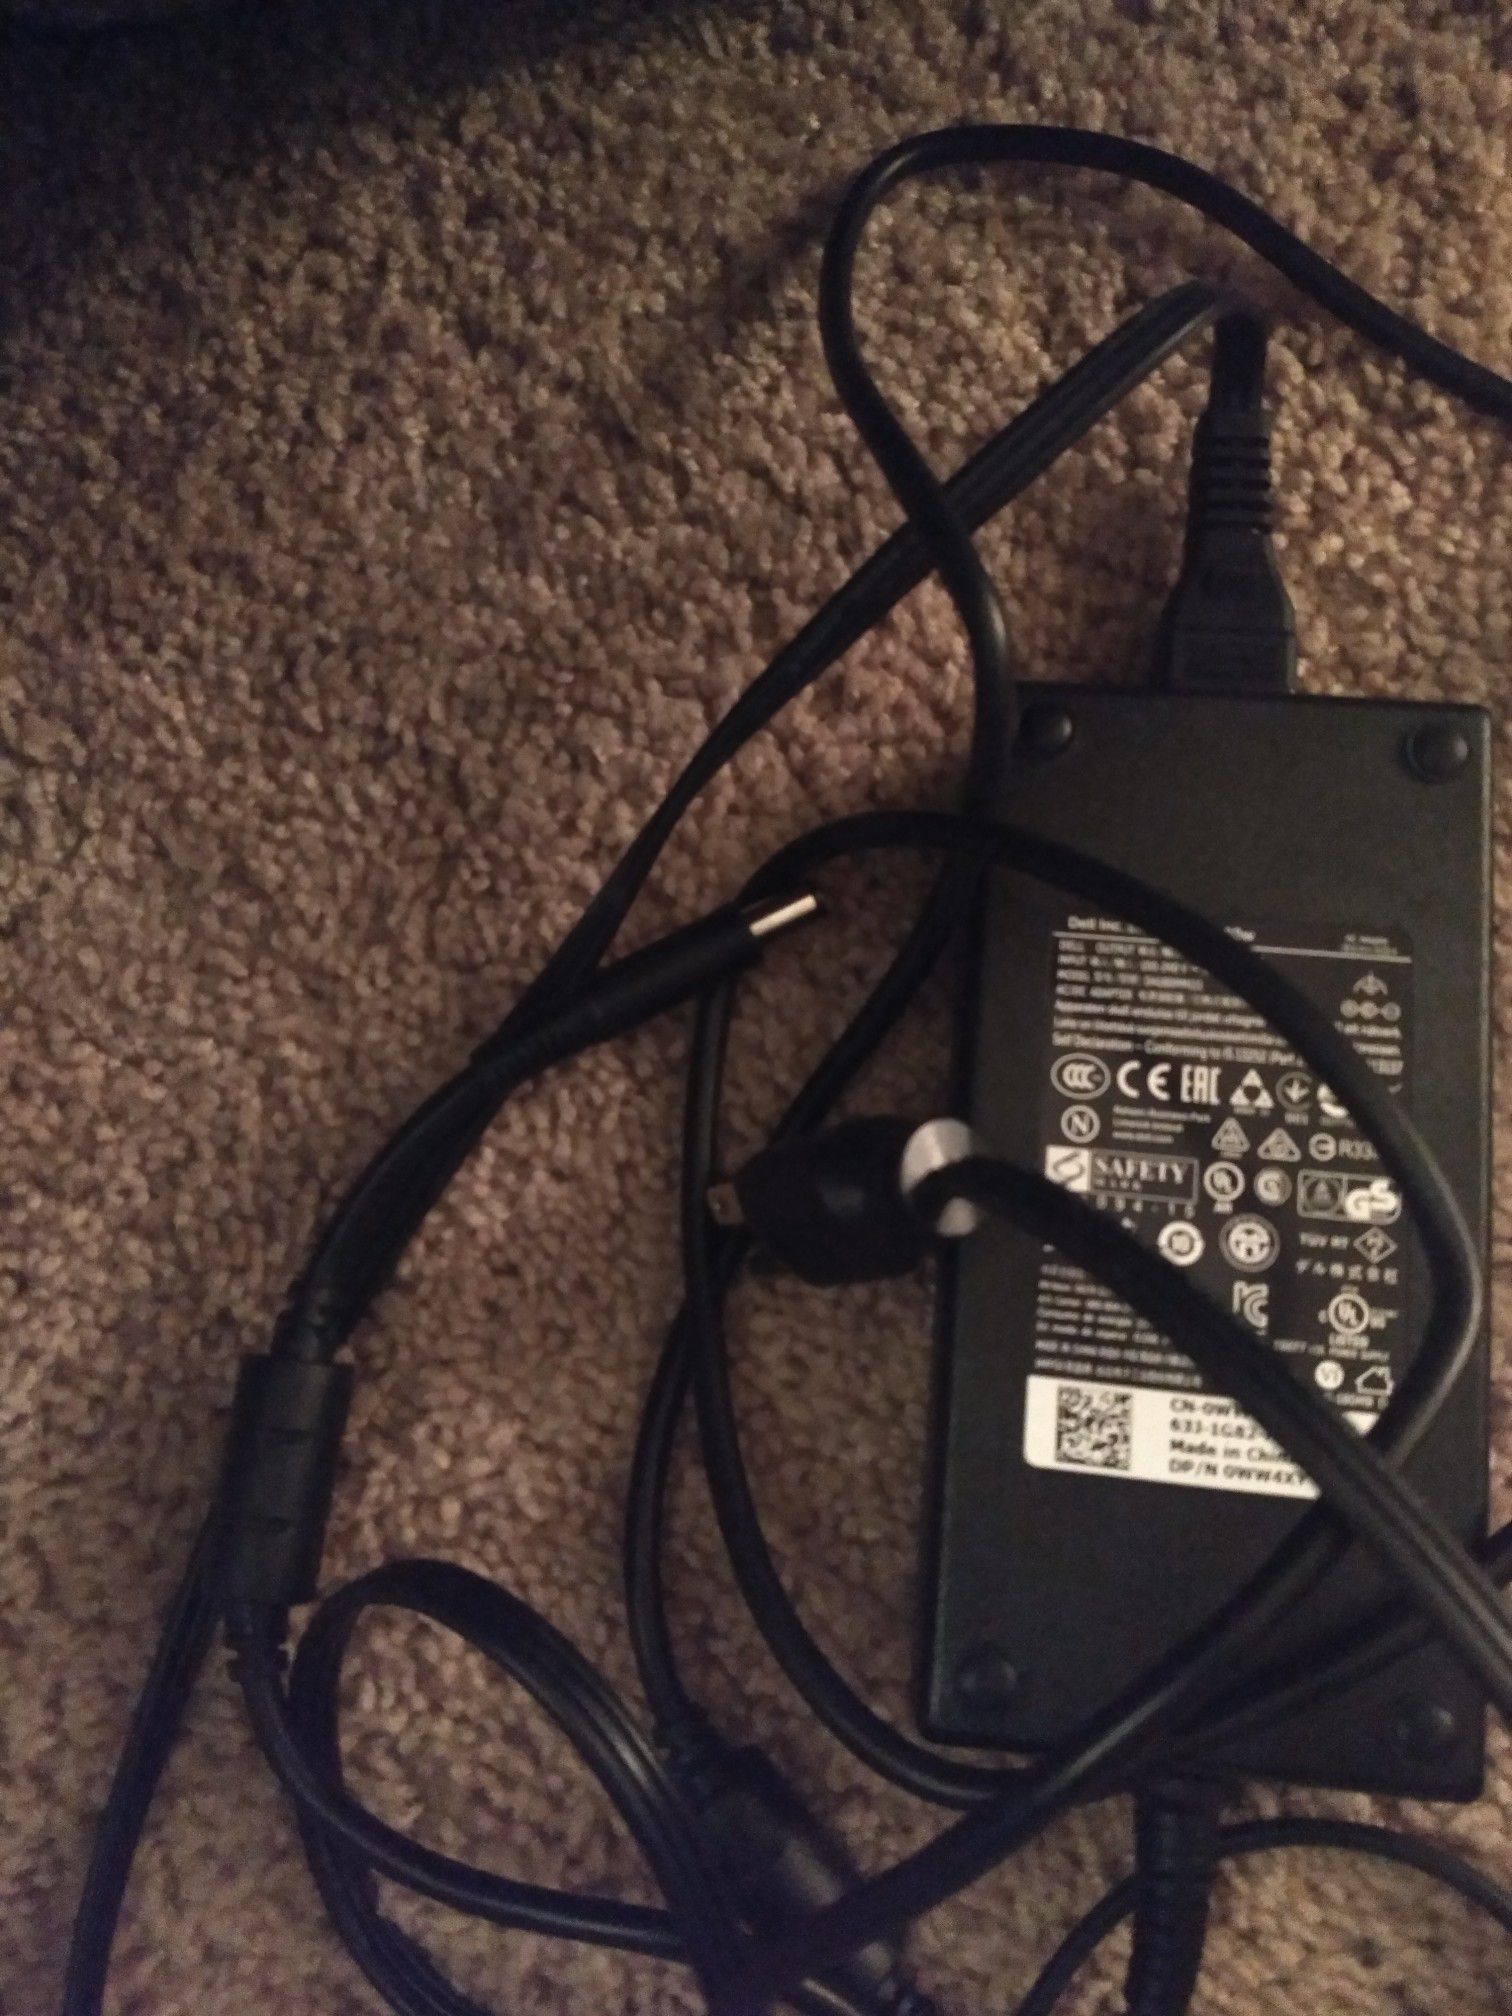 Original Dell 180w laptop charger